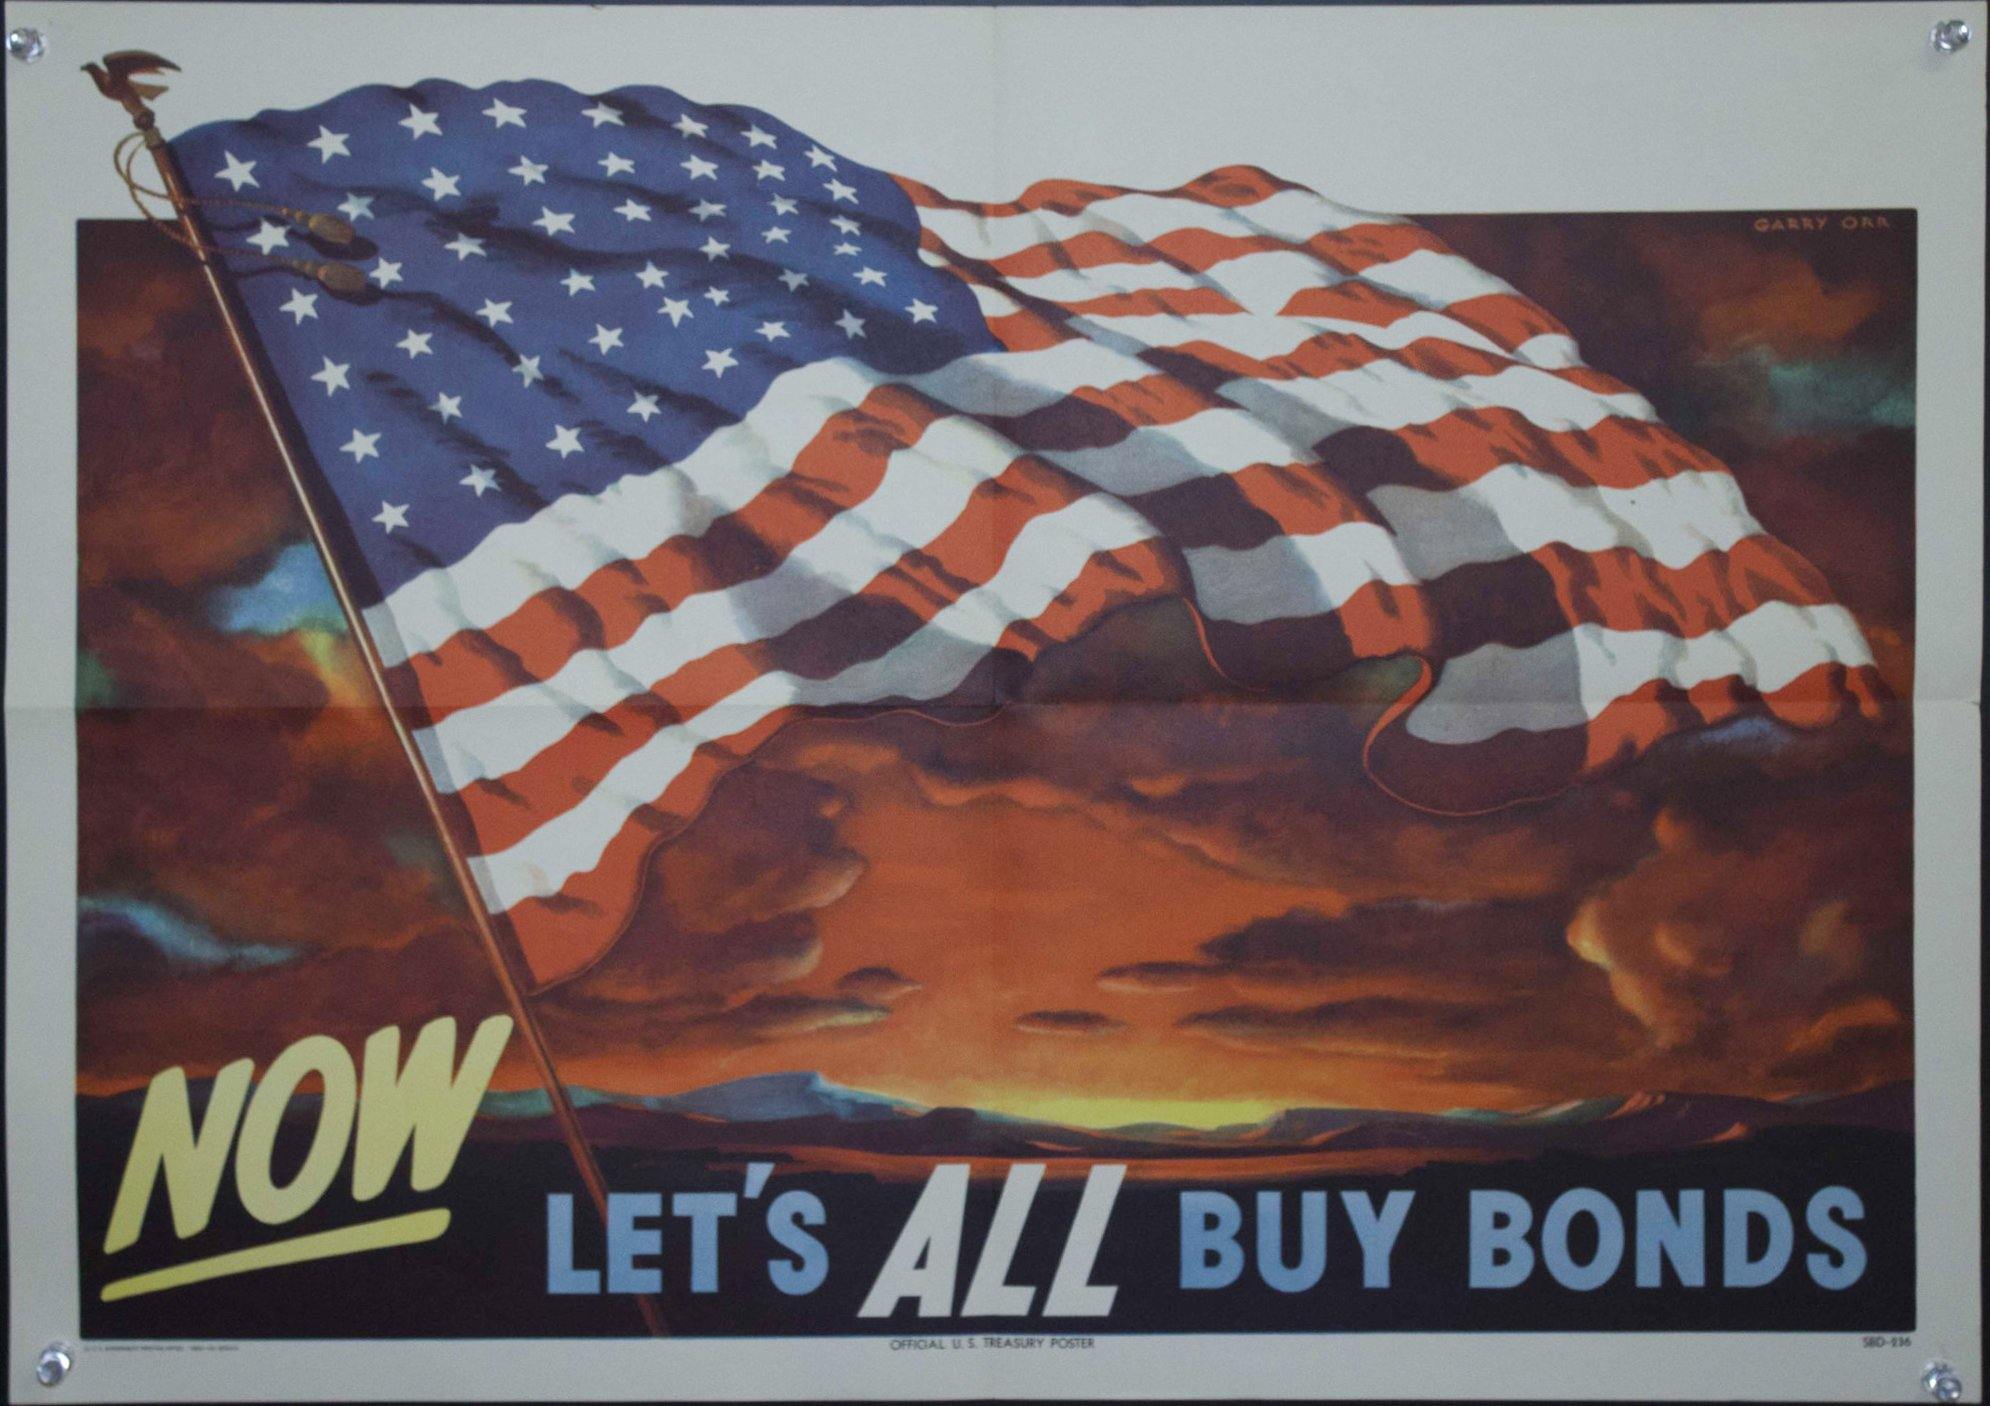 1950 Now Let's All Buy Bonds Garry Orr U.S. Treasury Department - Golden Age Posters